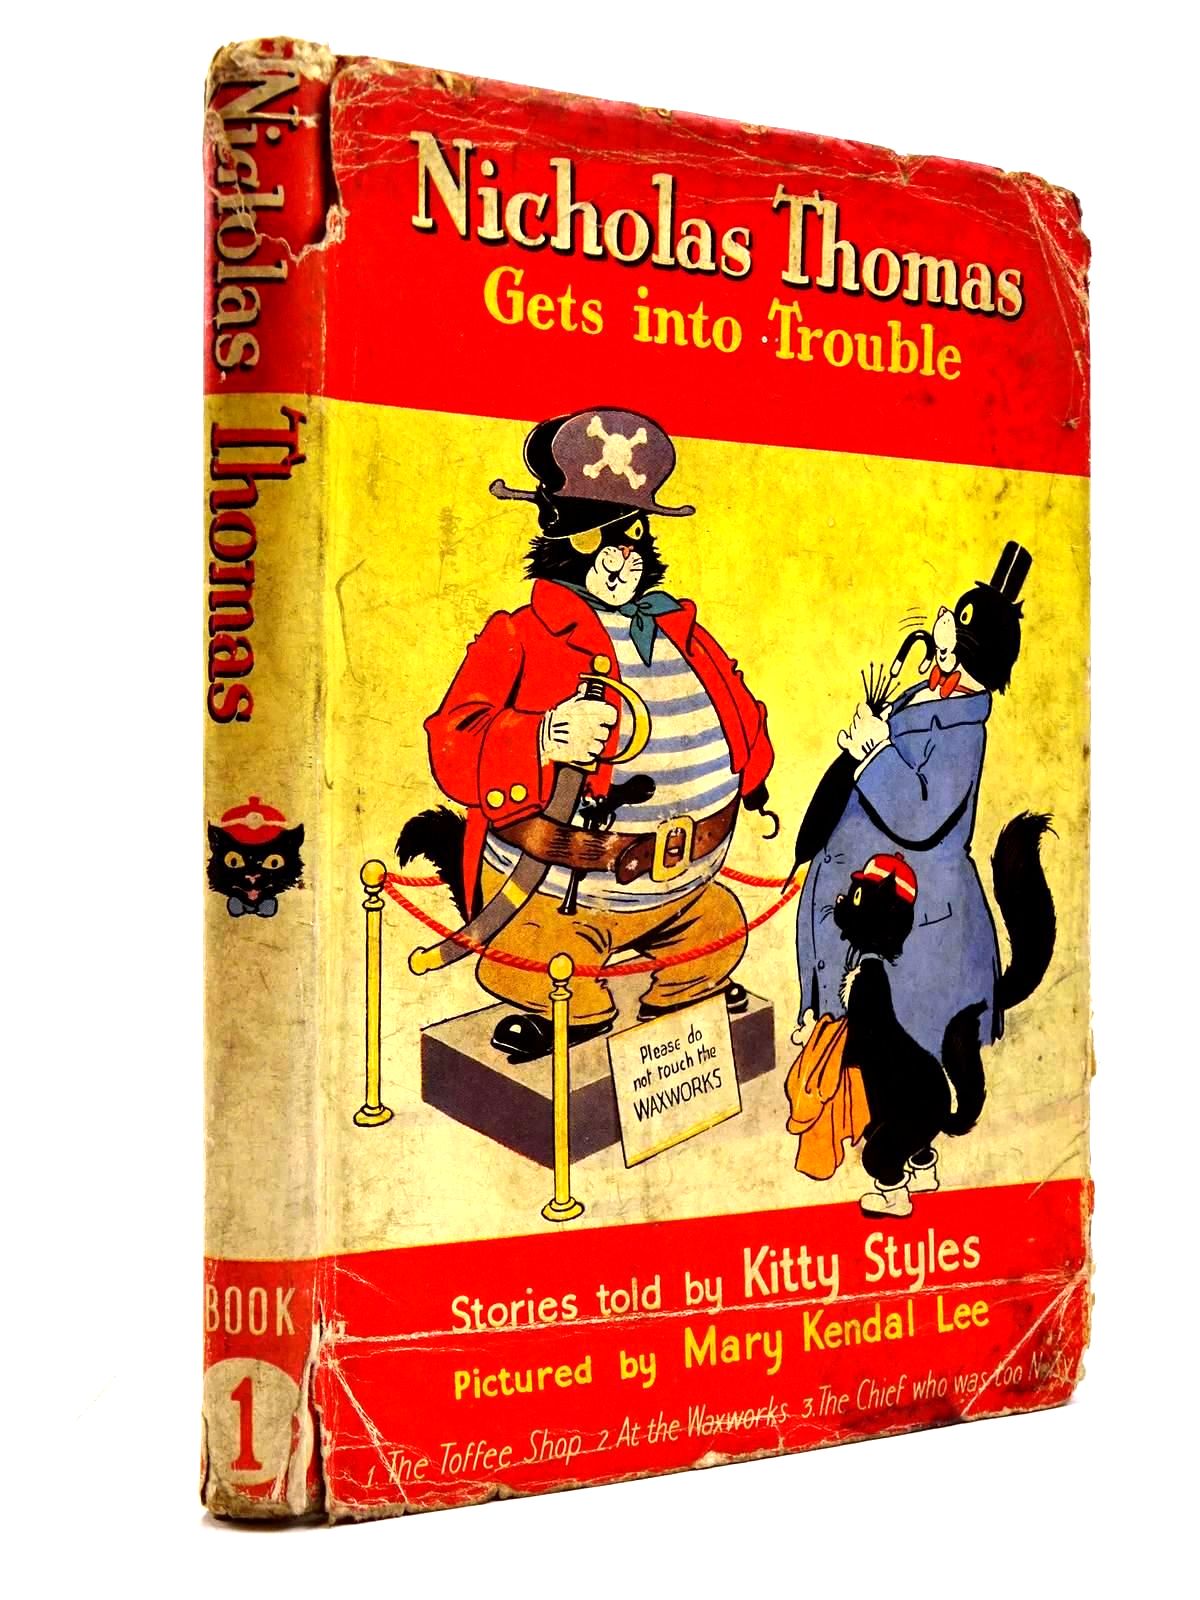 STYLES, KITTY ILLUSTRATED BY LEE, MARY KENDAL - Nicholas Thomas Gets Into Trouble Book 1